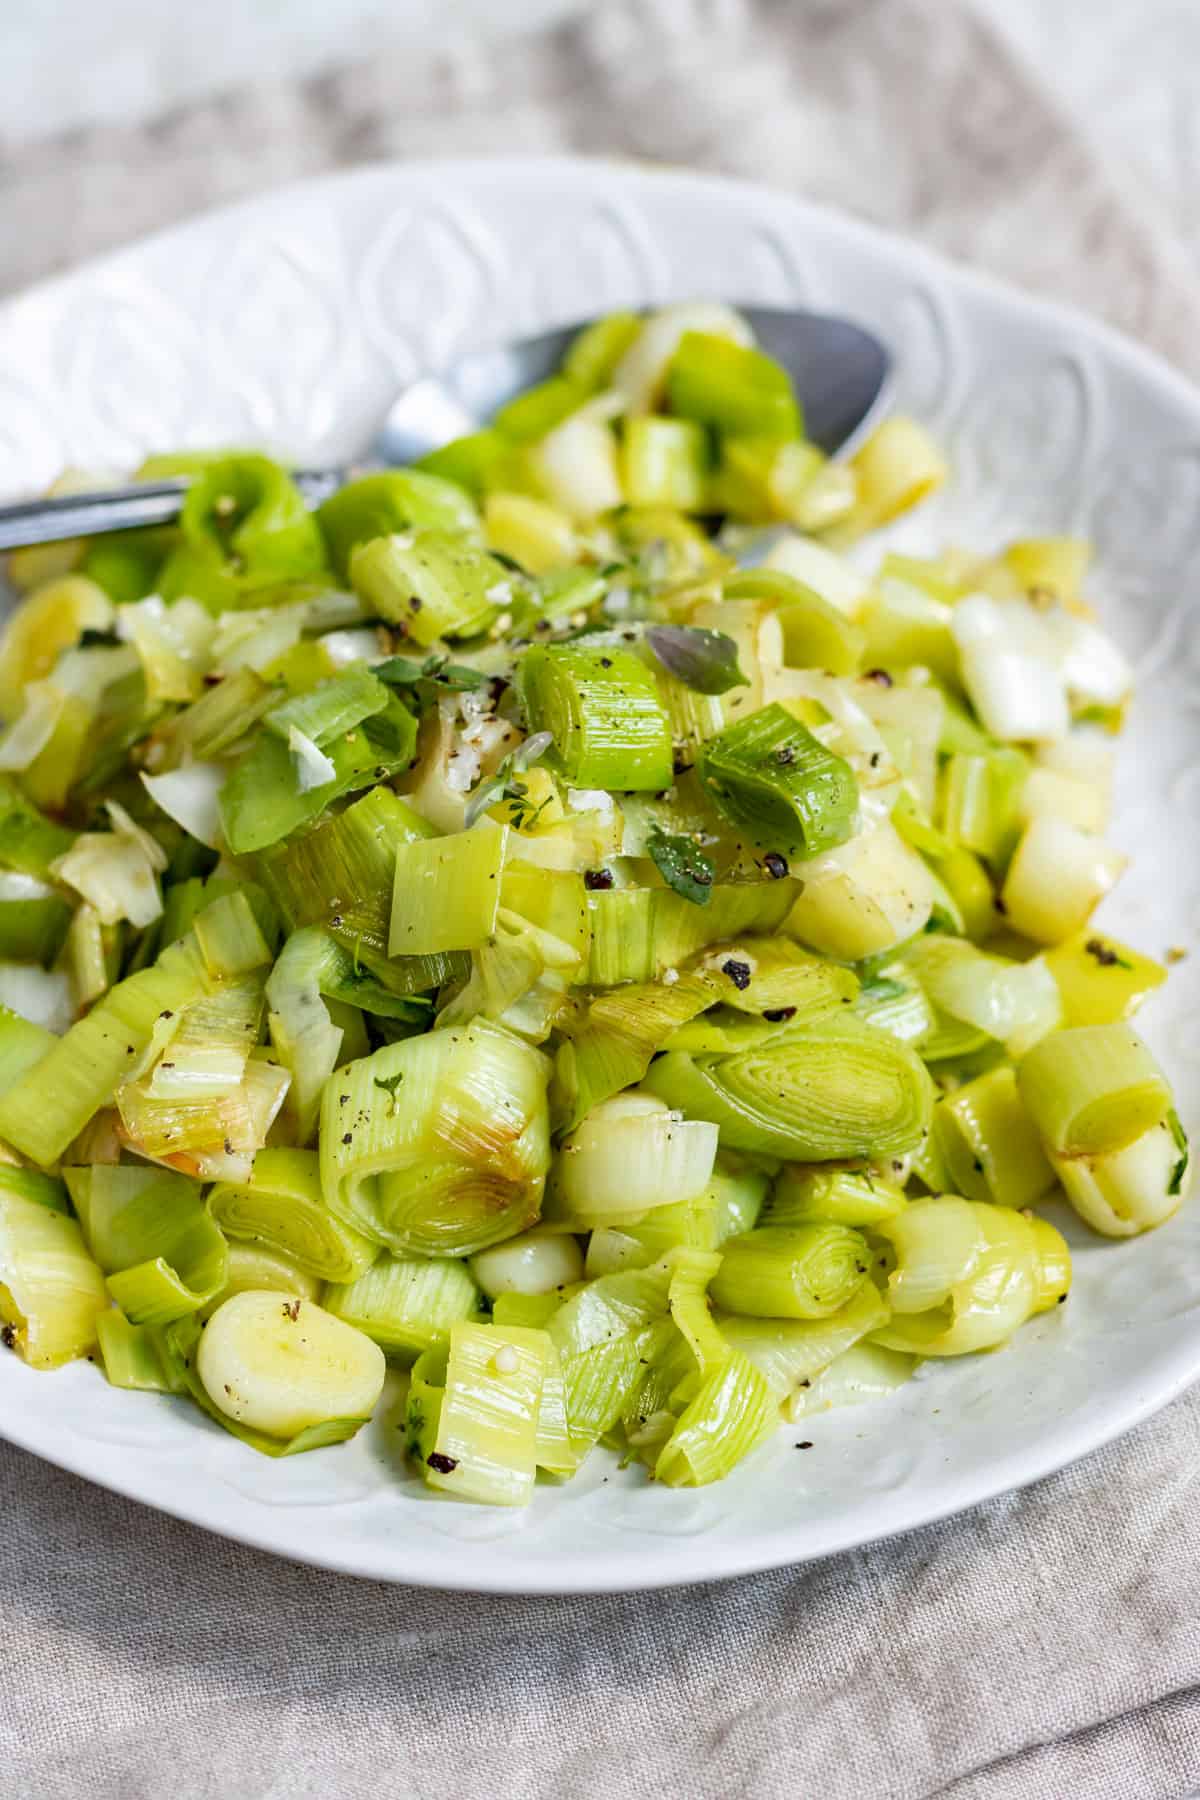 Serving dish of chopped, cooked leeks.